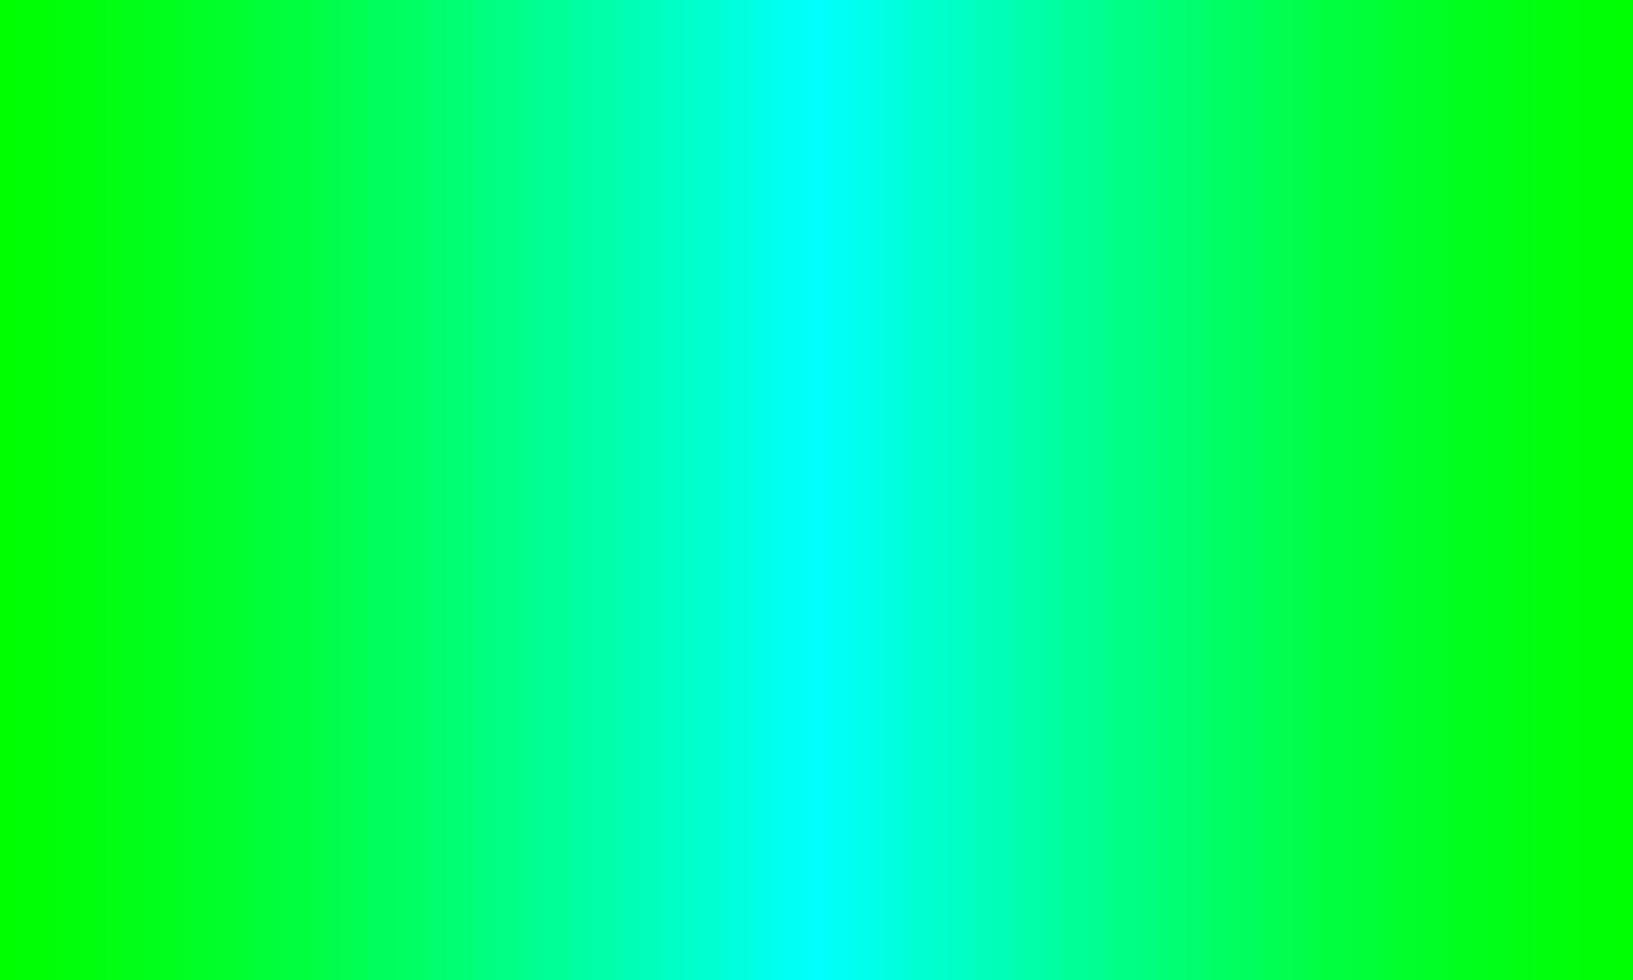 green, pastel blue and green gradient. abstract, blank, clean, colors, cheerful and simple style. suitable for background, banner, flyer, pamphlet, wallpaper or decor vector